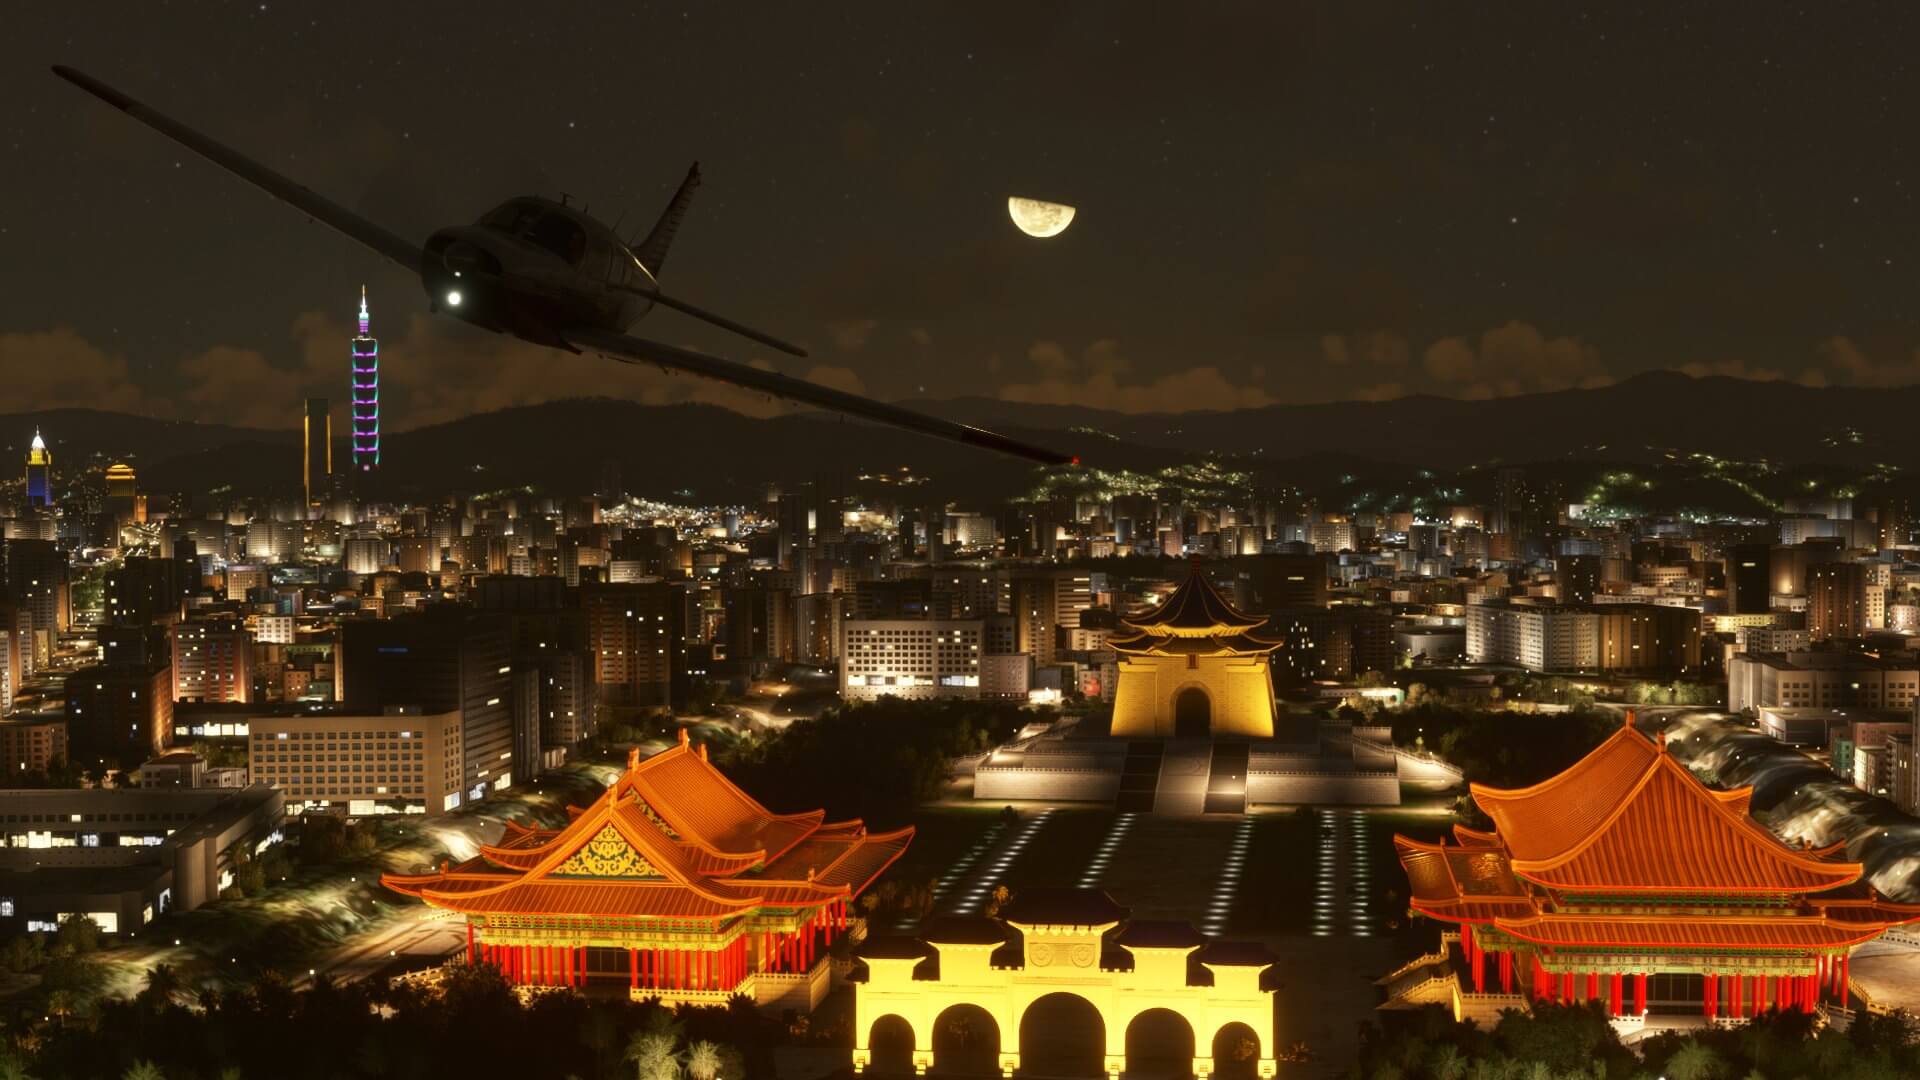 A low wing propeller aircraft flies above a Chinese temple at night.